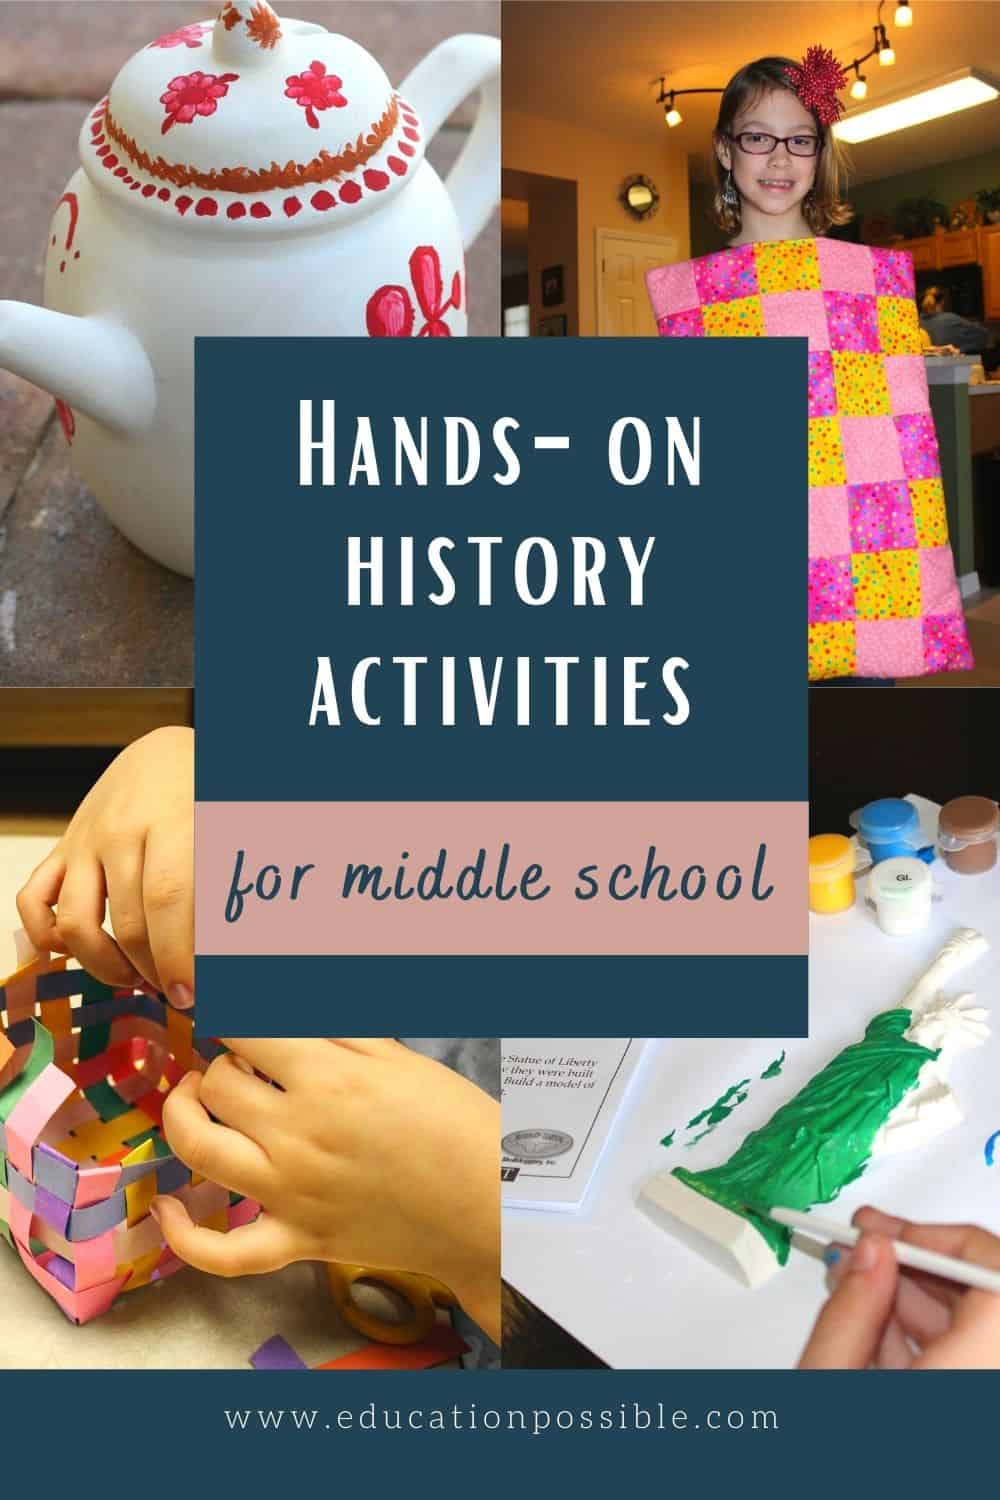 Collage of 4 images of history crafts for middle schoolers. A teapot, quilt, weaving, and magnet painting.